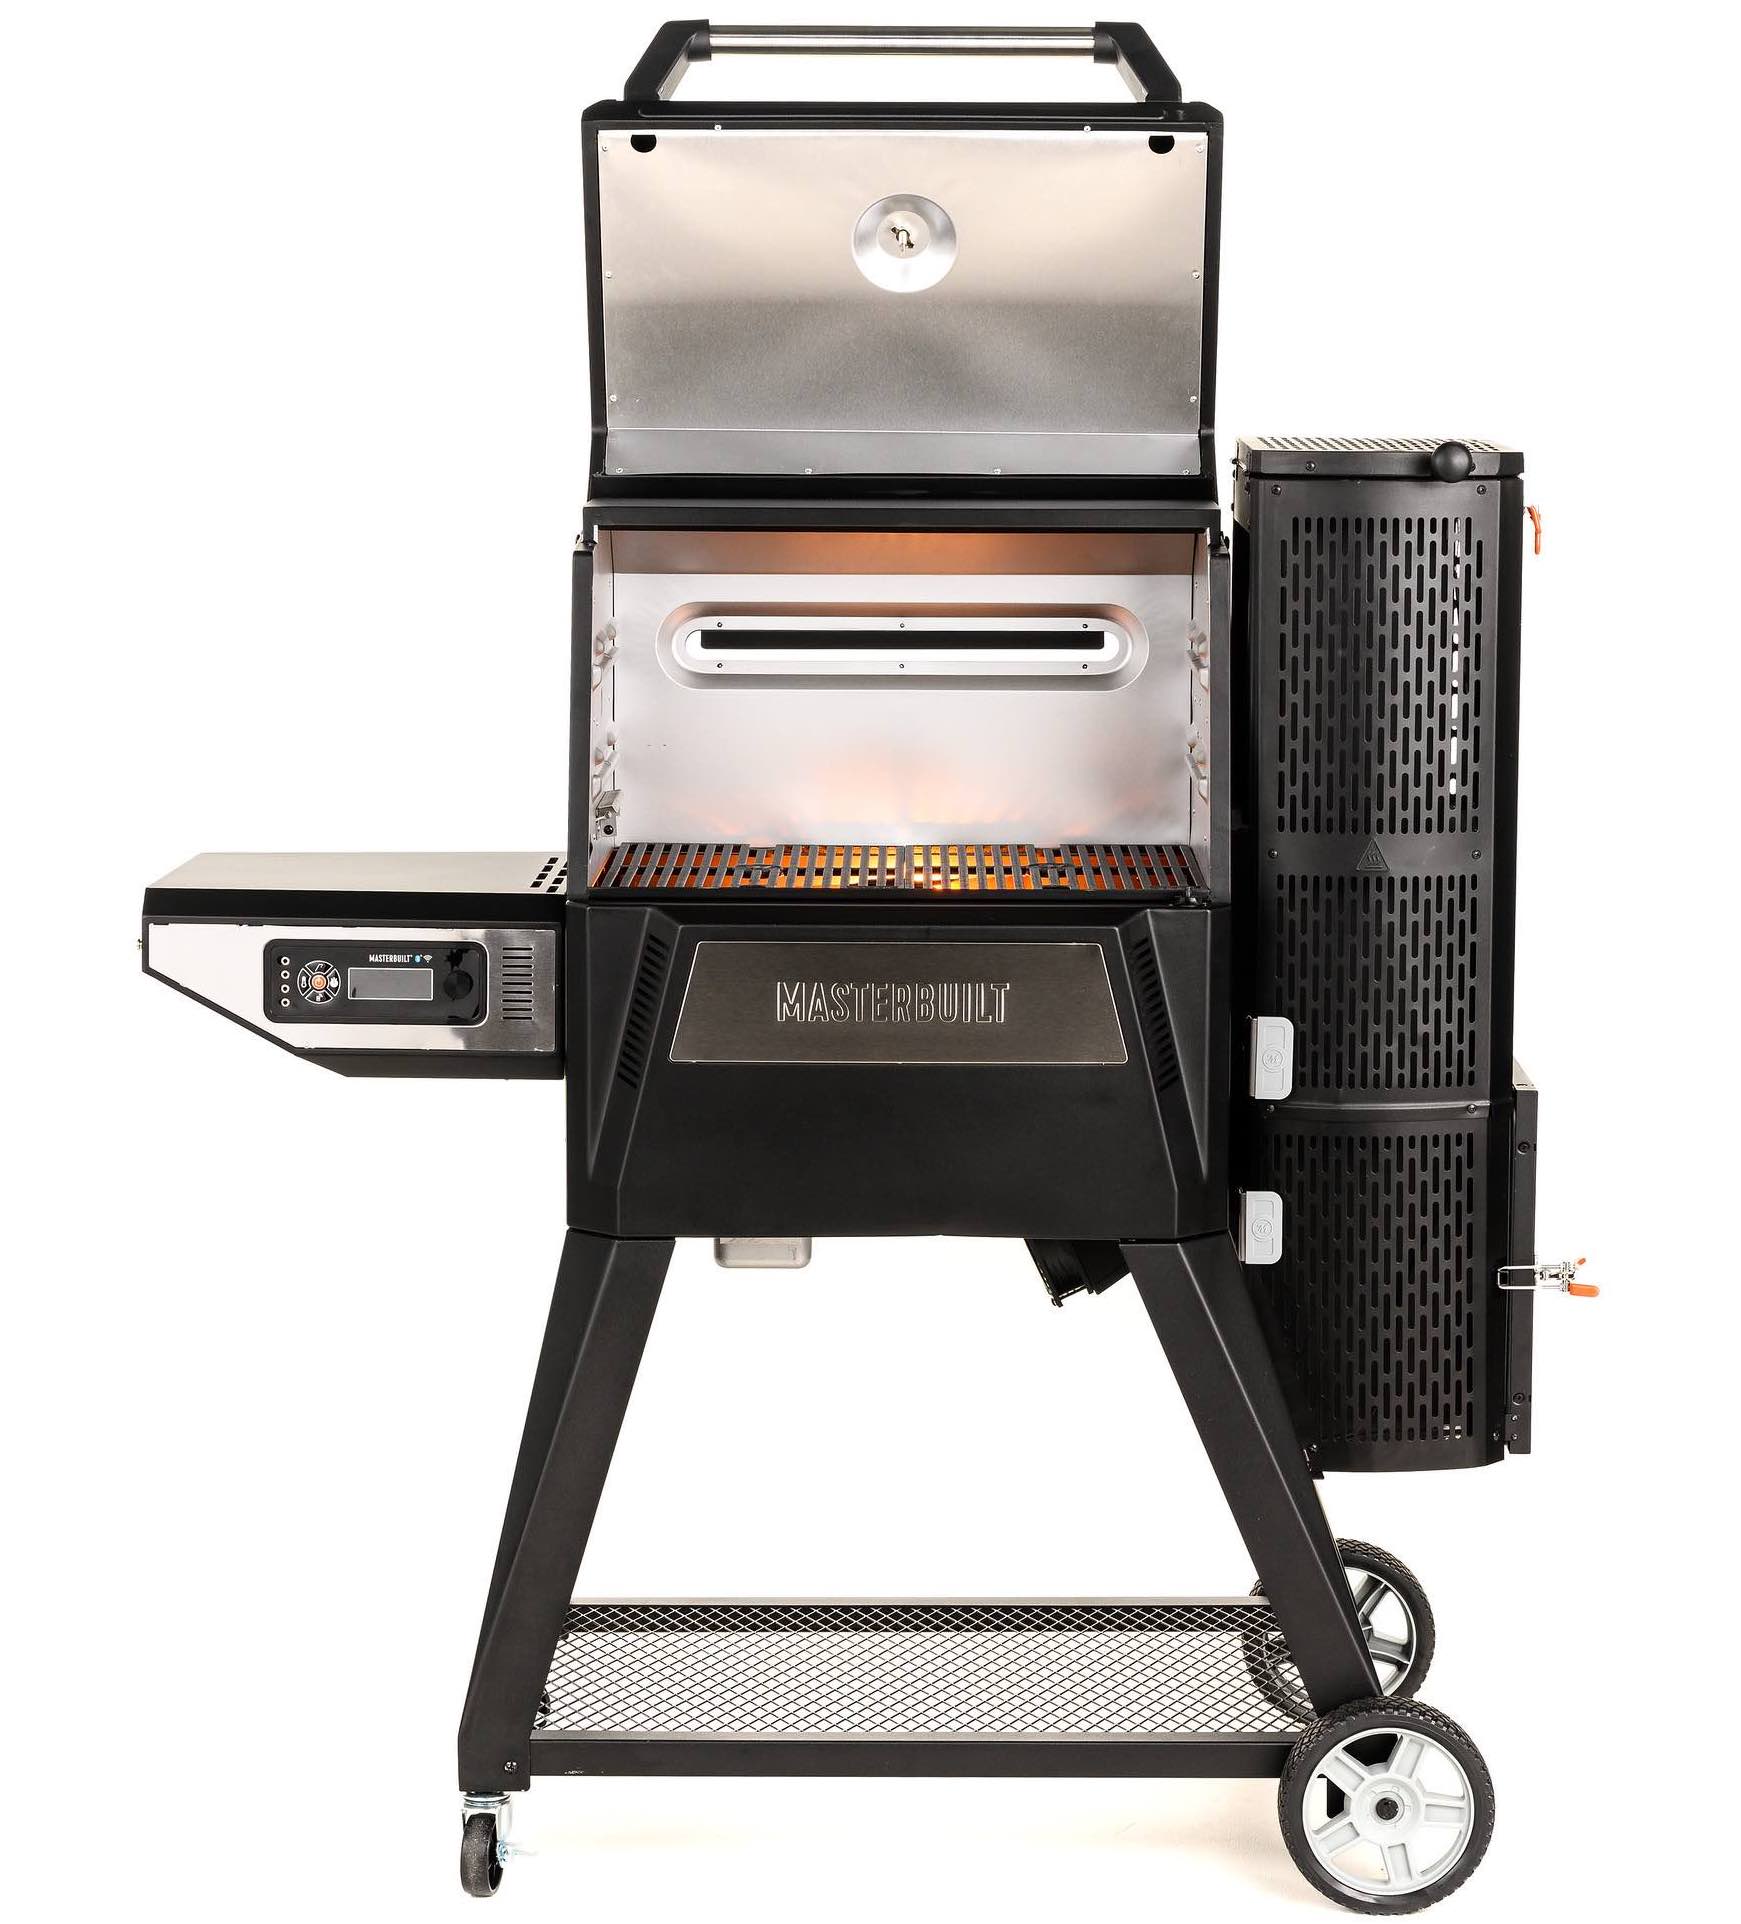 Masterbuilt Gravity Series 560 Digital Charcoal Grill and Smoker Combo - image 5 of 13